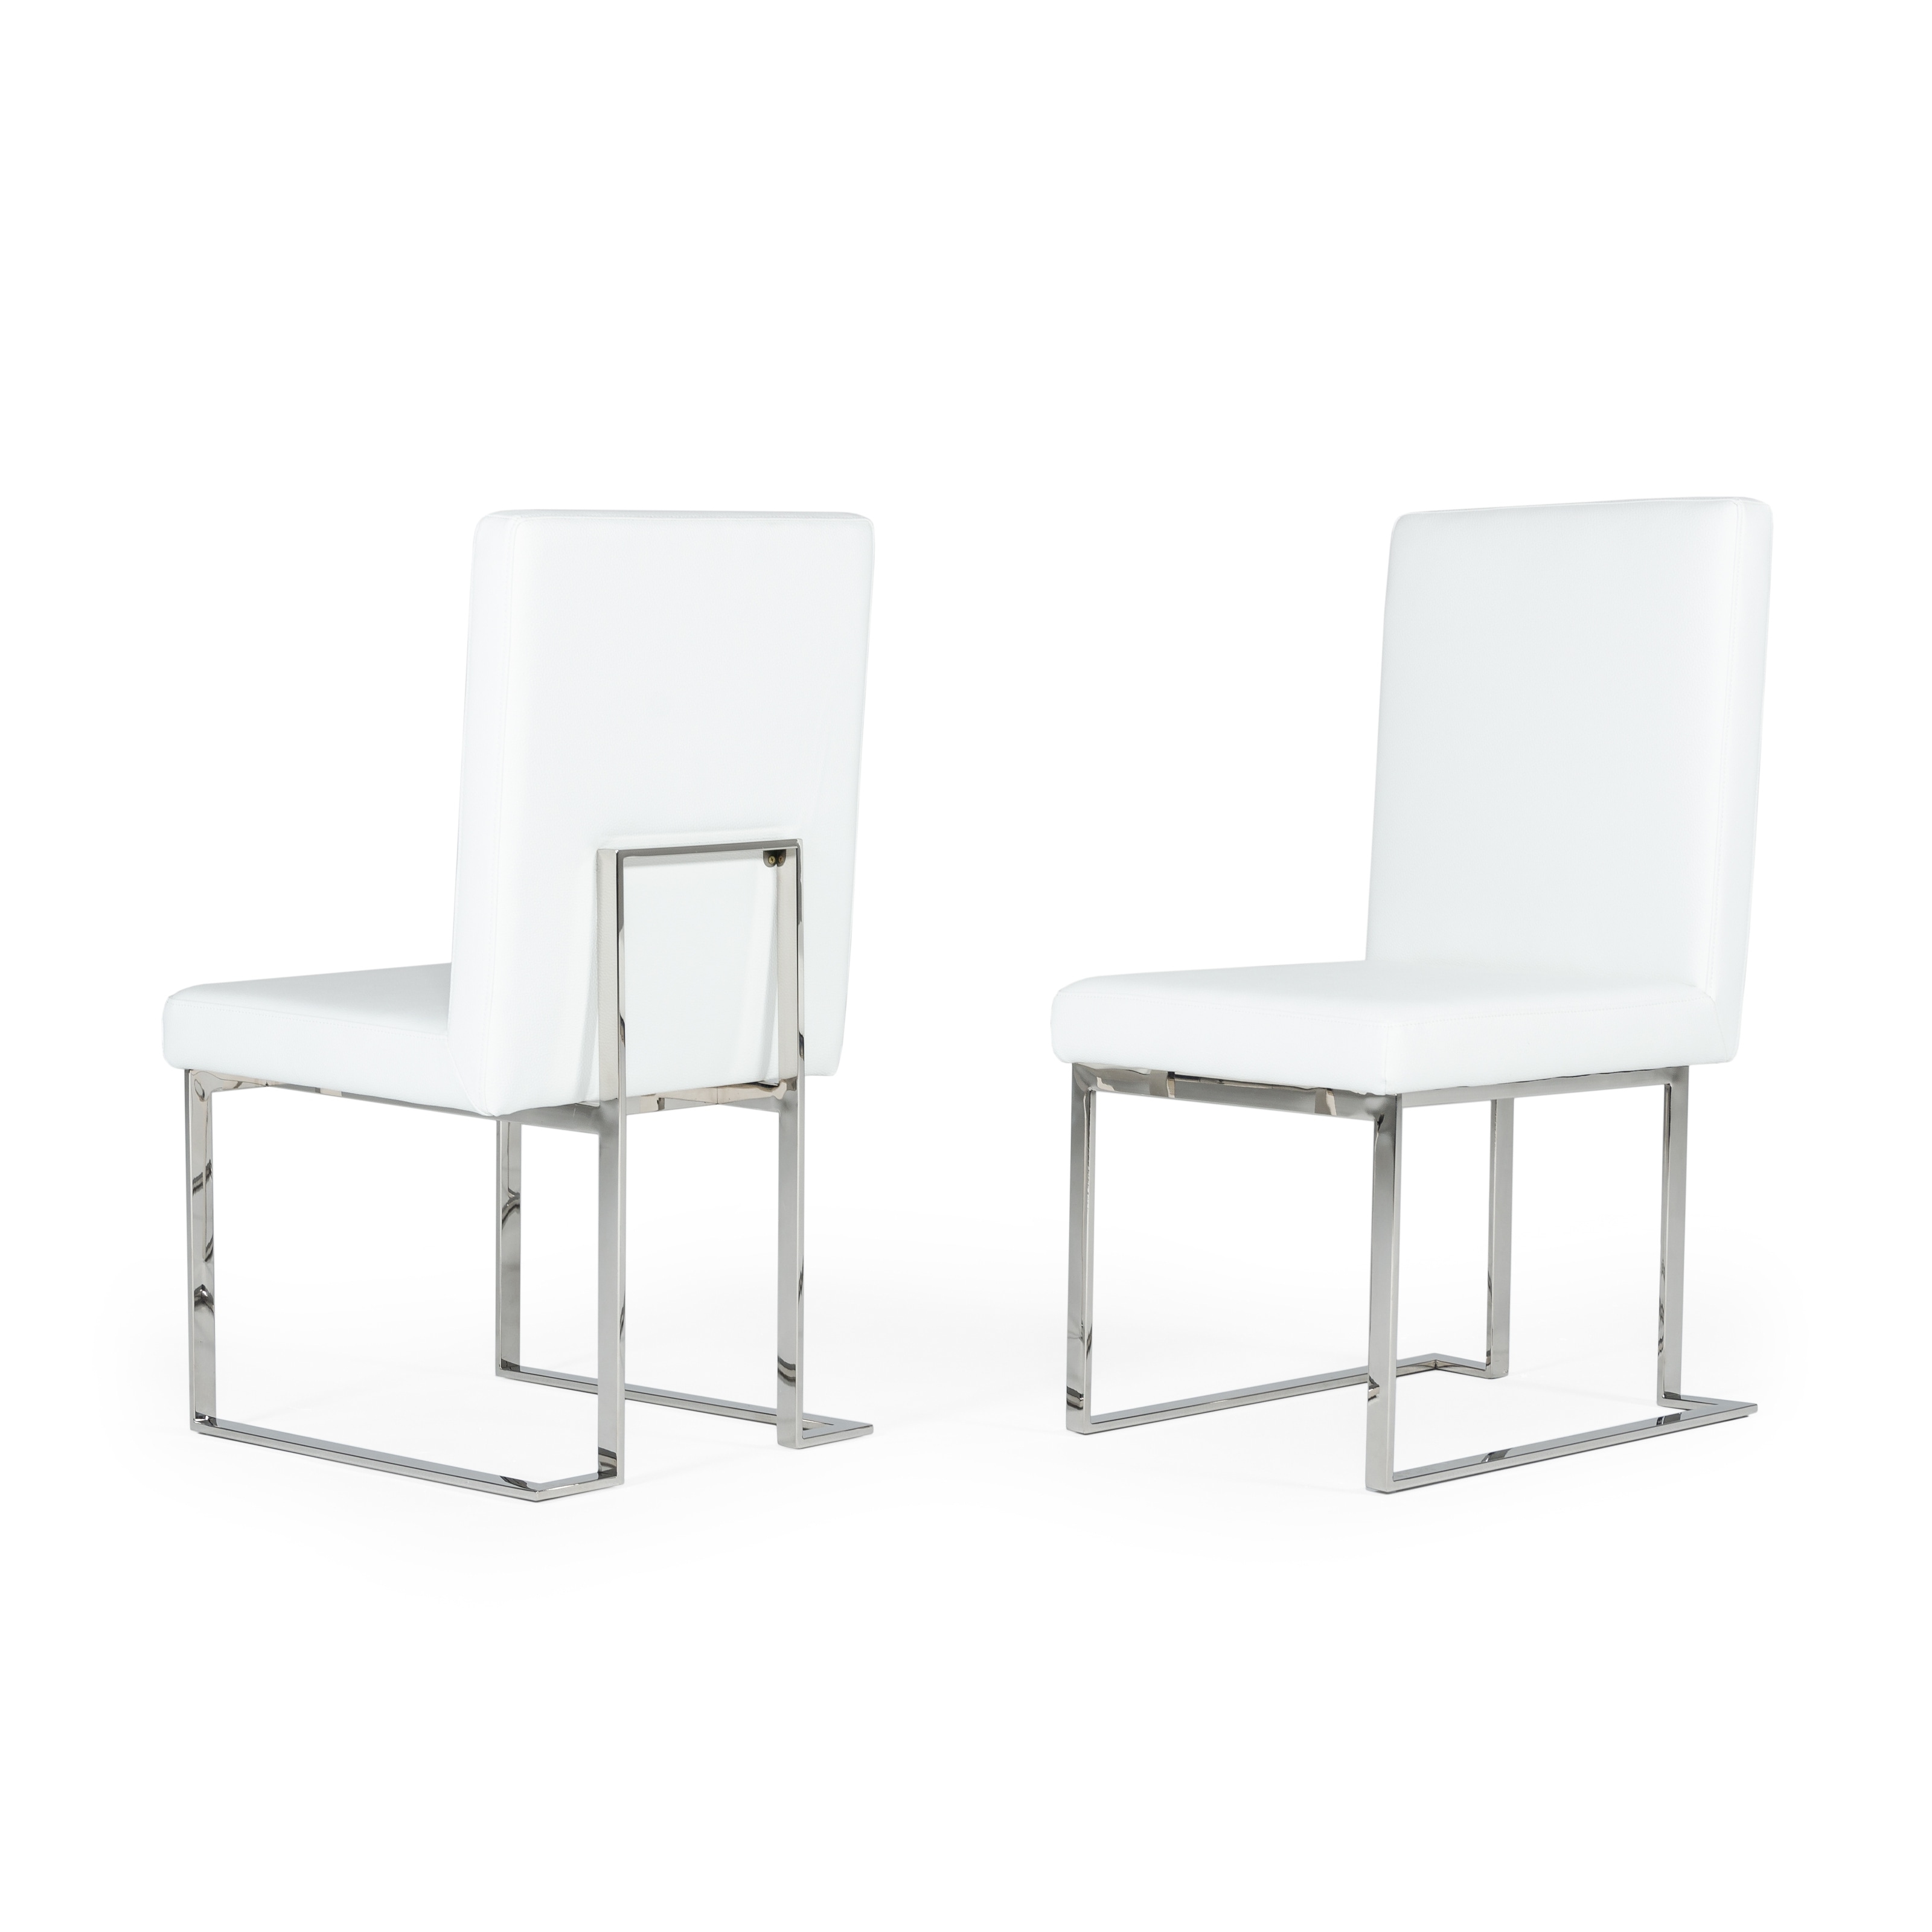 Shop Black Friday Deals On Modrest Fowler Modern White Leatherette Dining Chair Set Of 2 Overstock 31295389